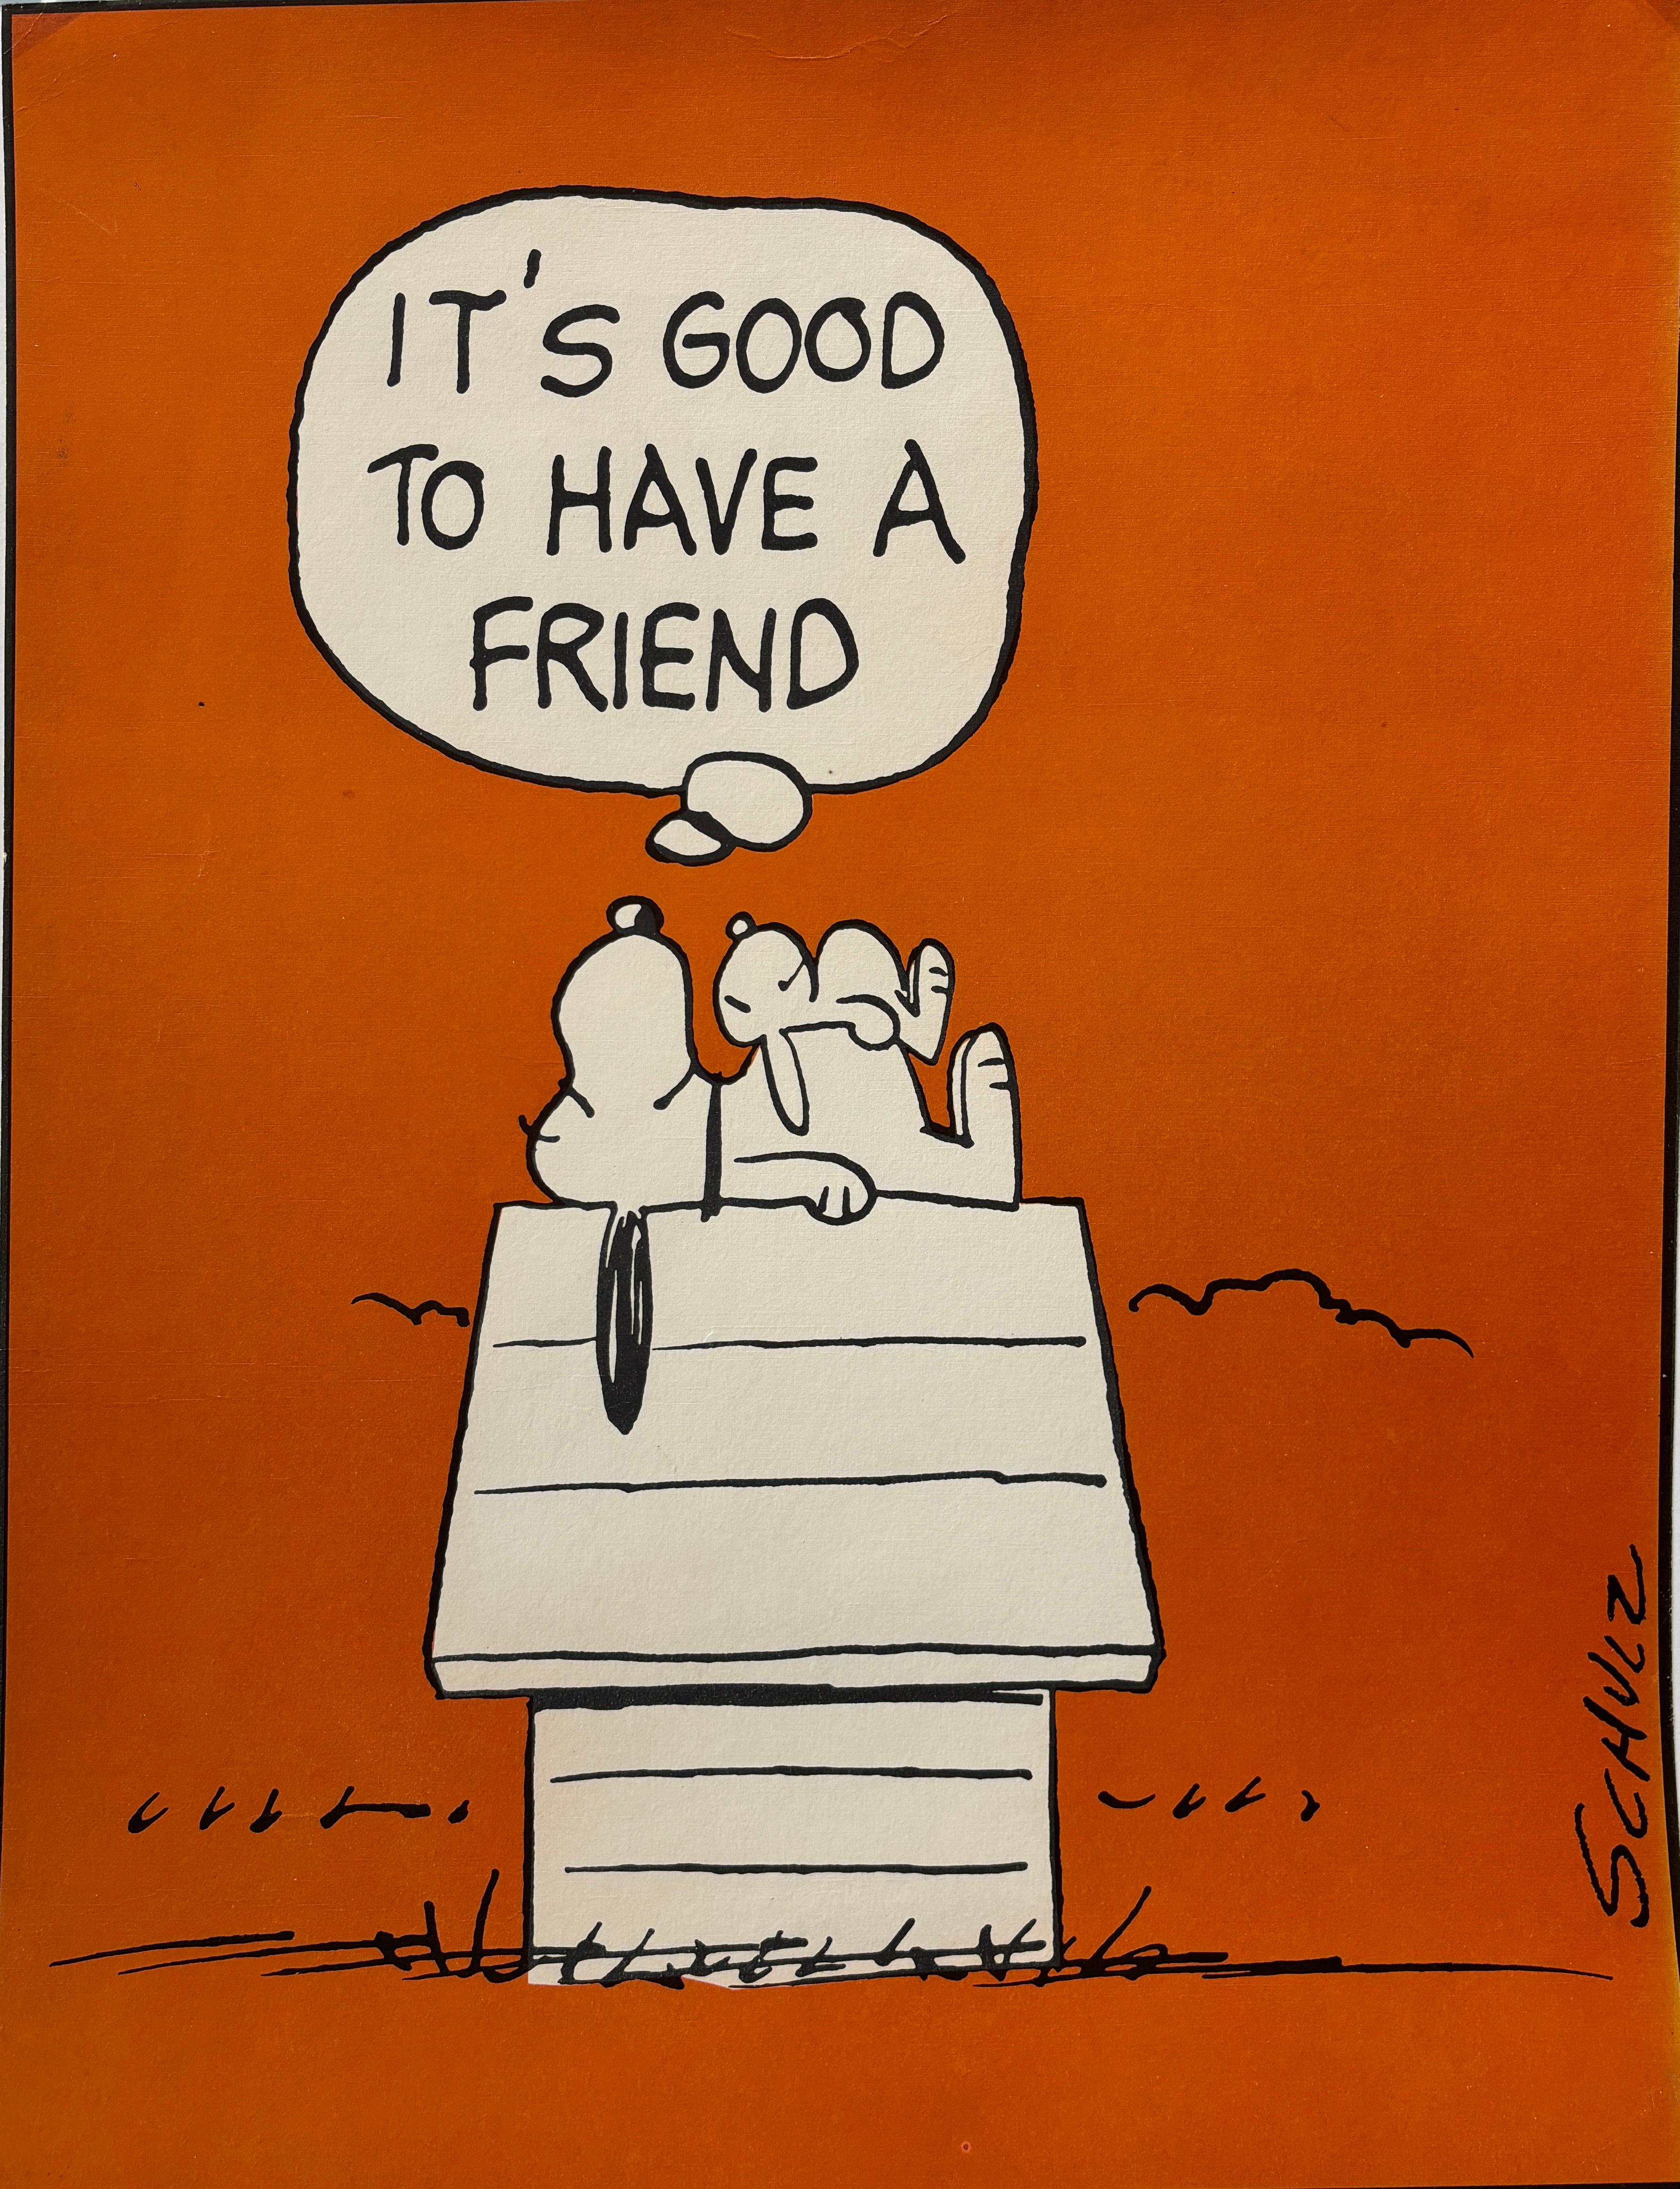 This is an original vintage poster from 1958 featuring SNOOPY by Schulz. This poster is in excellent condition and has been linen backed for preservation.

CONDITION	
Good

FORMAT	
Linen backed

DIMENSIONS	
50x62cm

ARTIST	
Schultz

YEAR	
1958